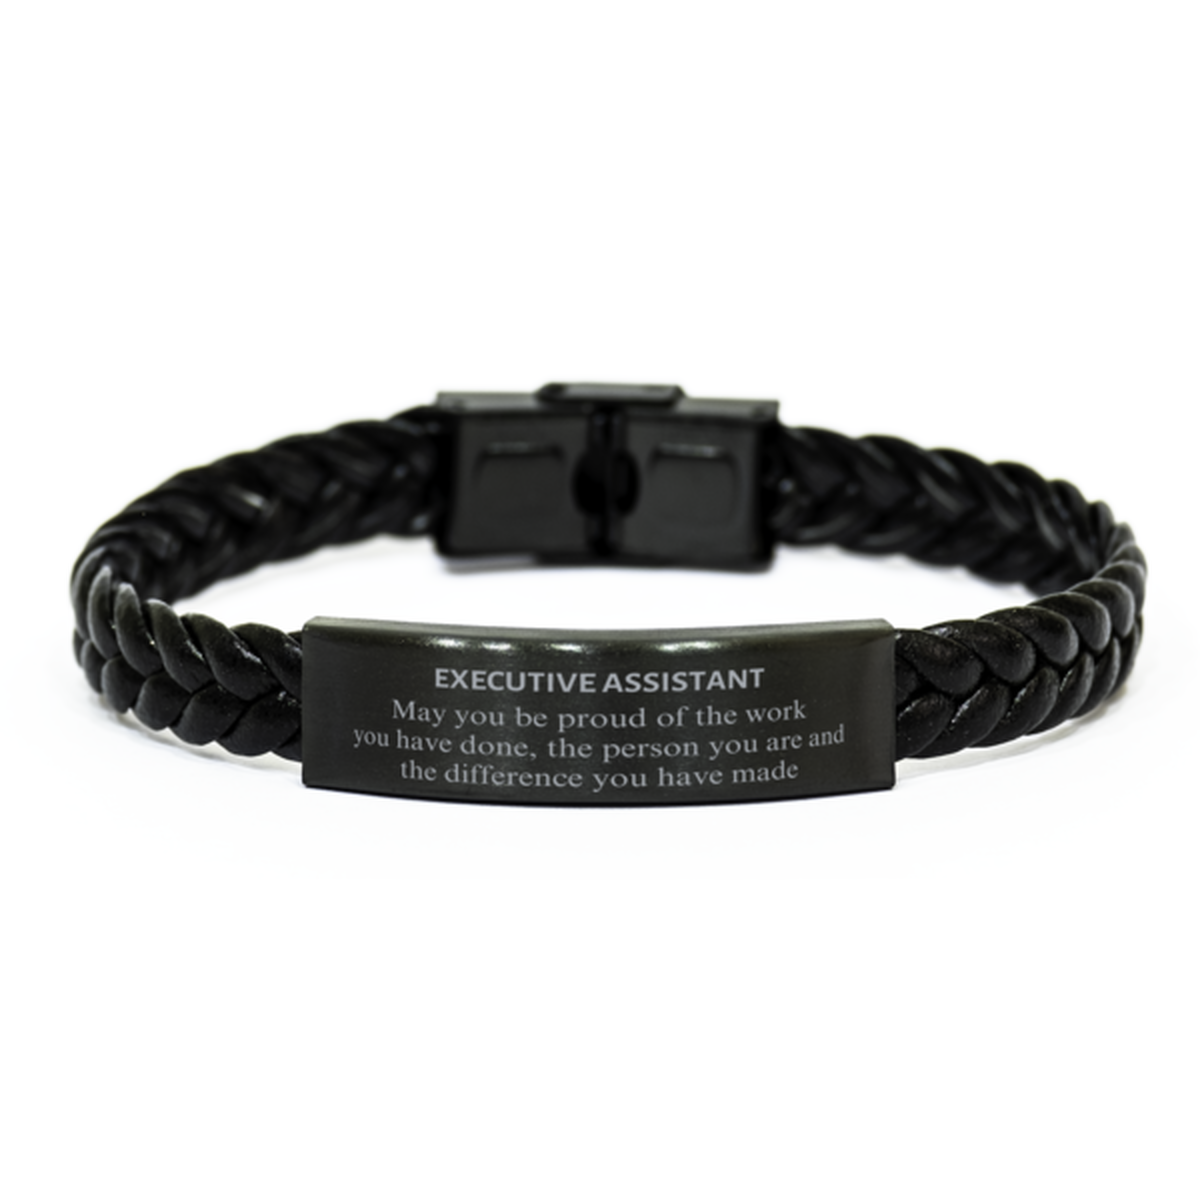 Executive Assistant May you be proud of the work you have done, Retirement Executive Assistant Braided Leather Bracelet for Colleague Appreciation Gifts Amazing for Executive Assistant